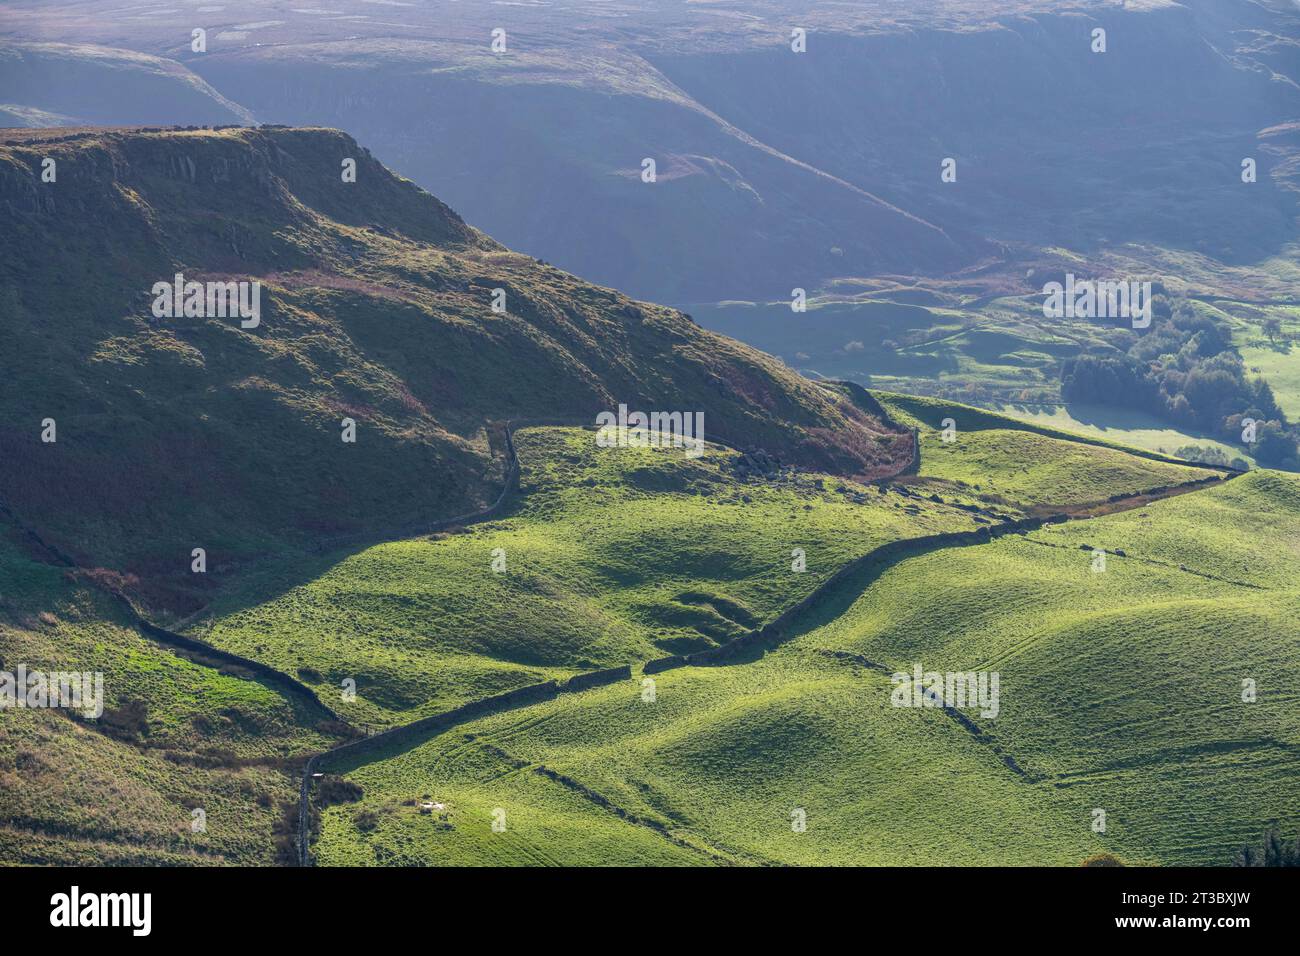 The slopes of Combs Edge near Chapel-en-le-Frith in the Peak District, Derbyshire, England. Stock Photo